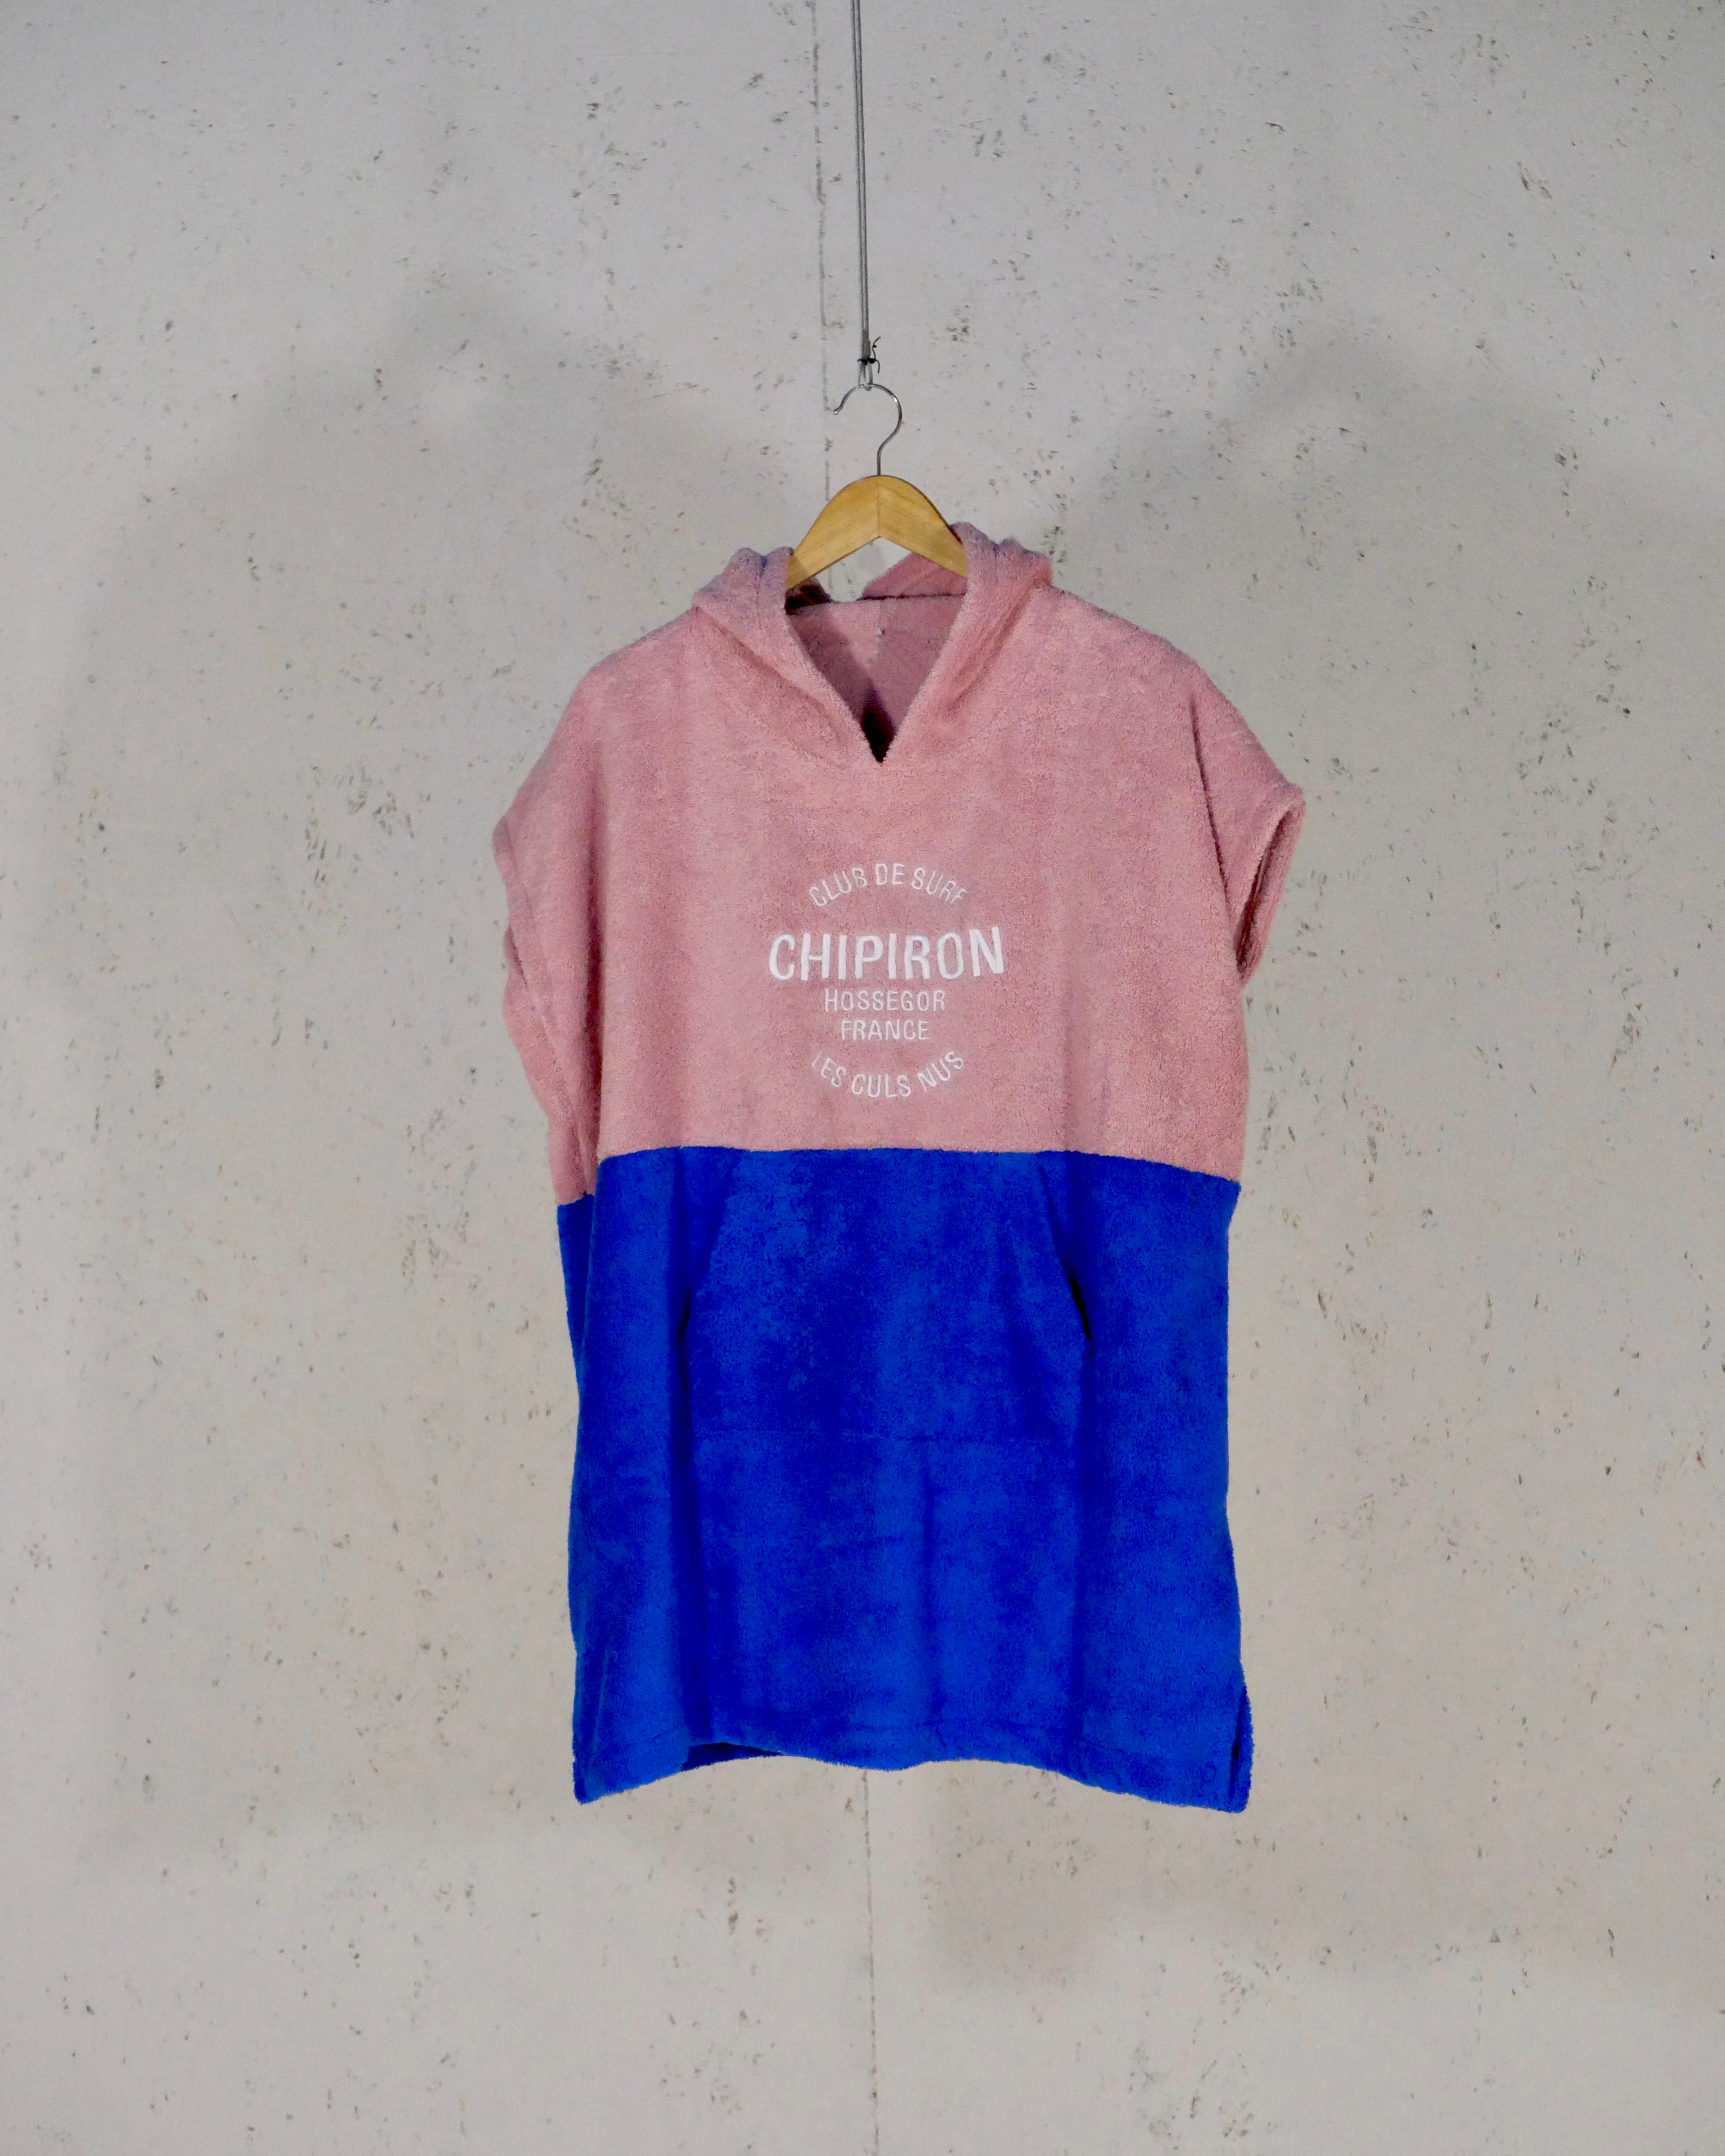 Pink and blue children's poncho